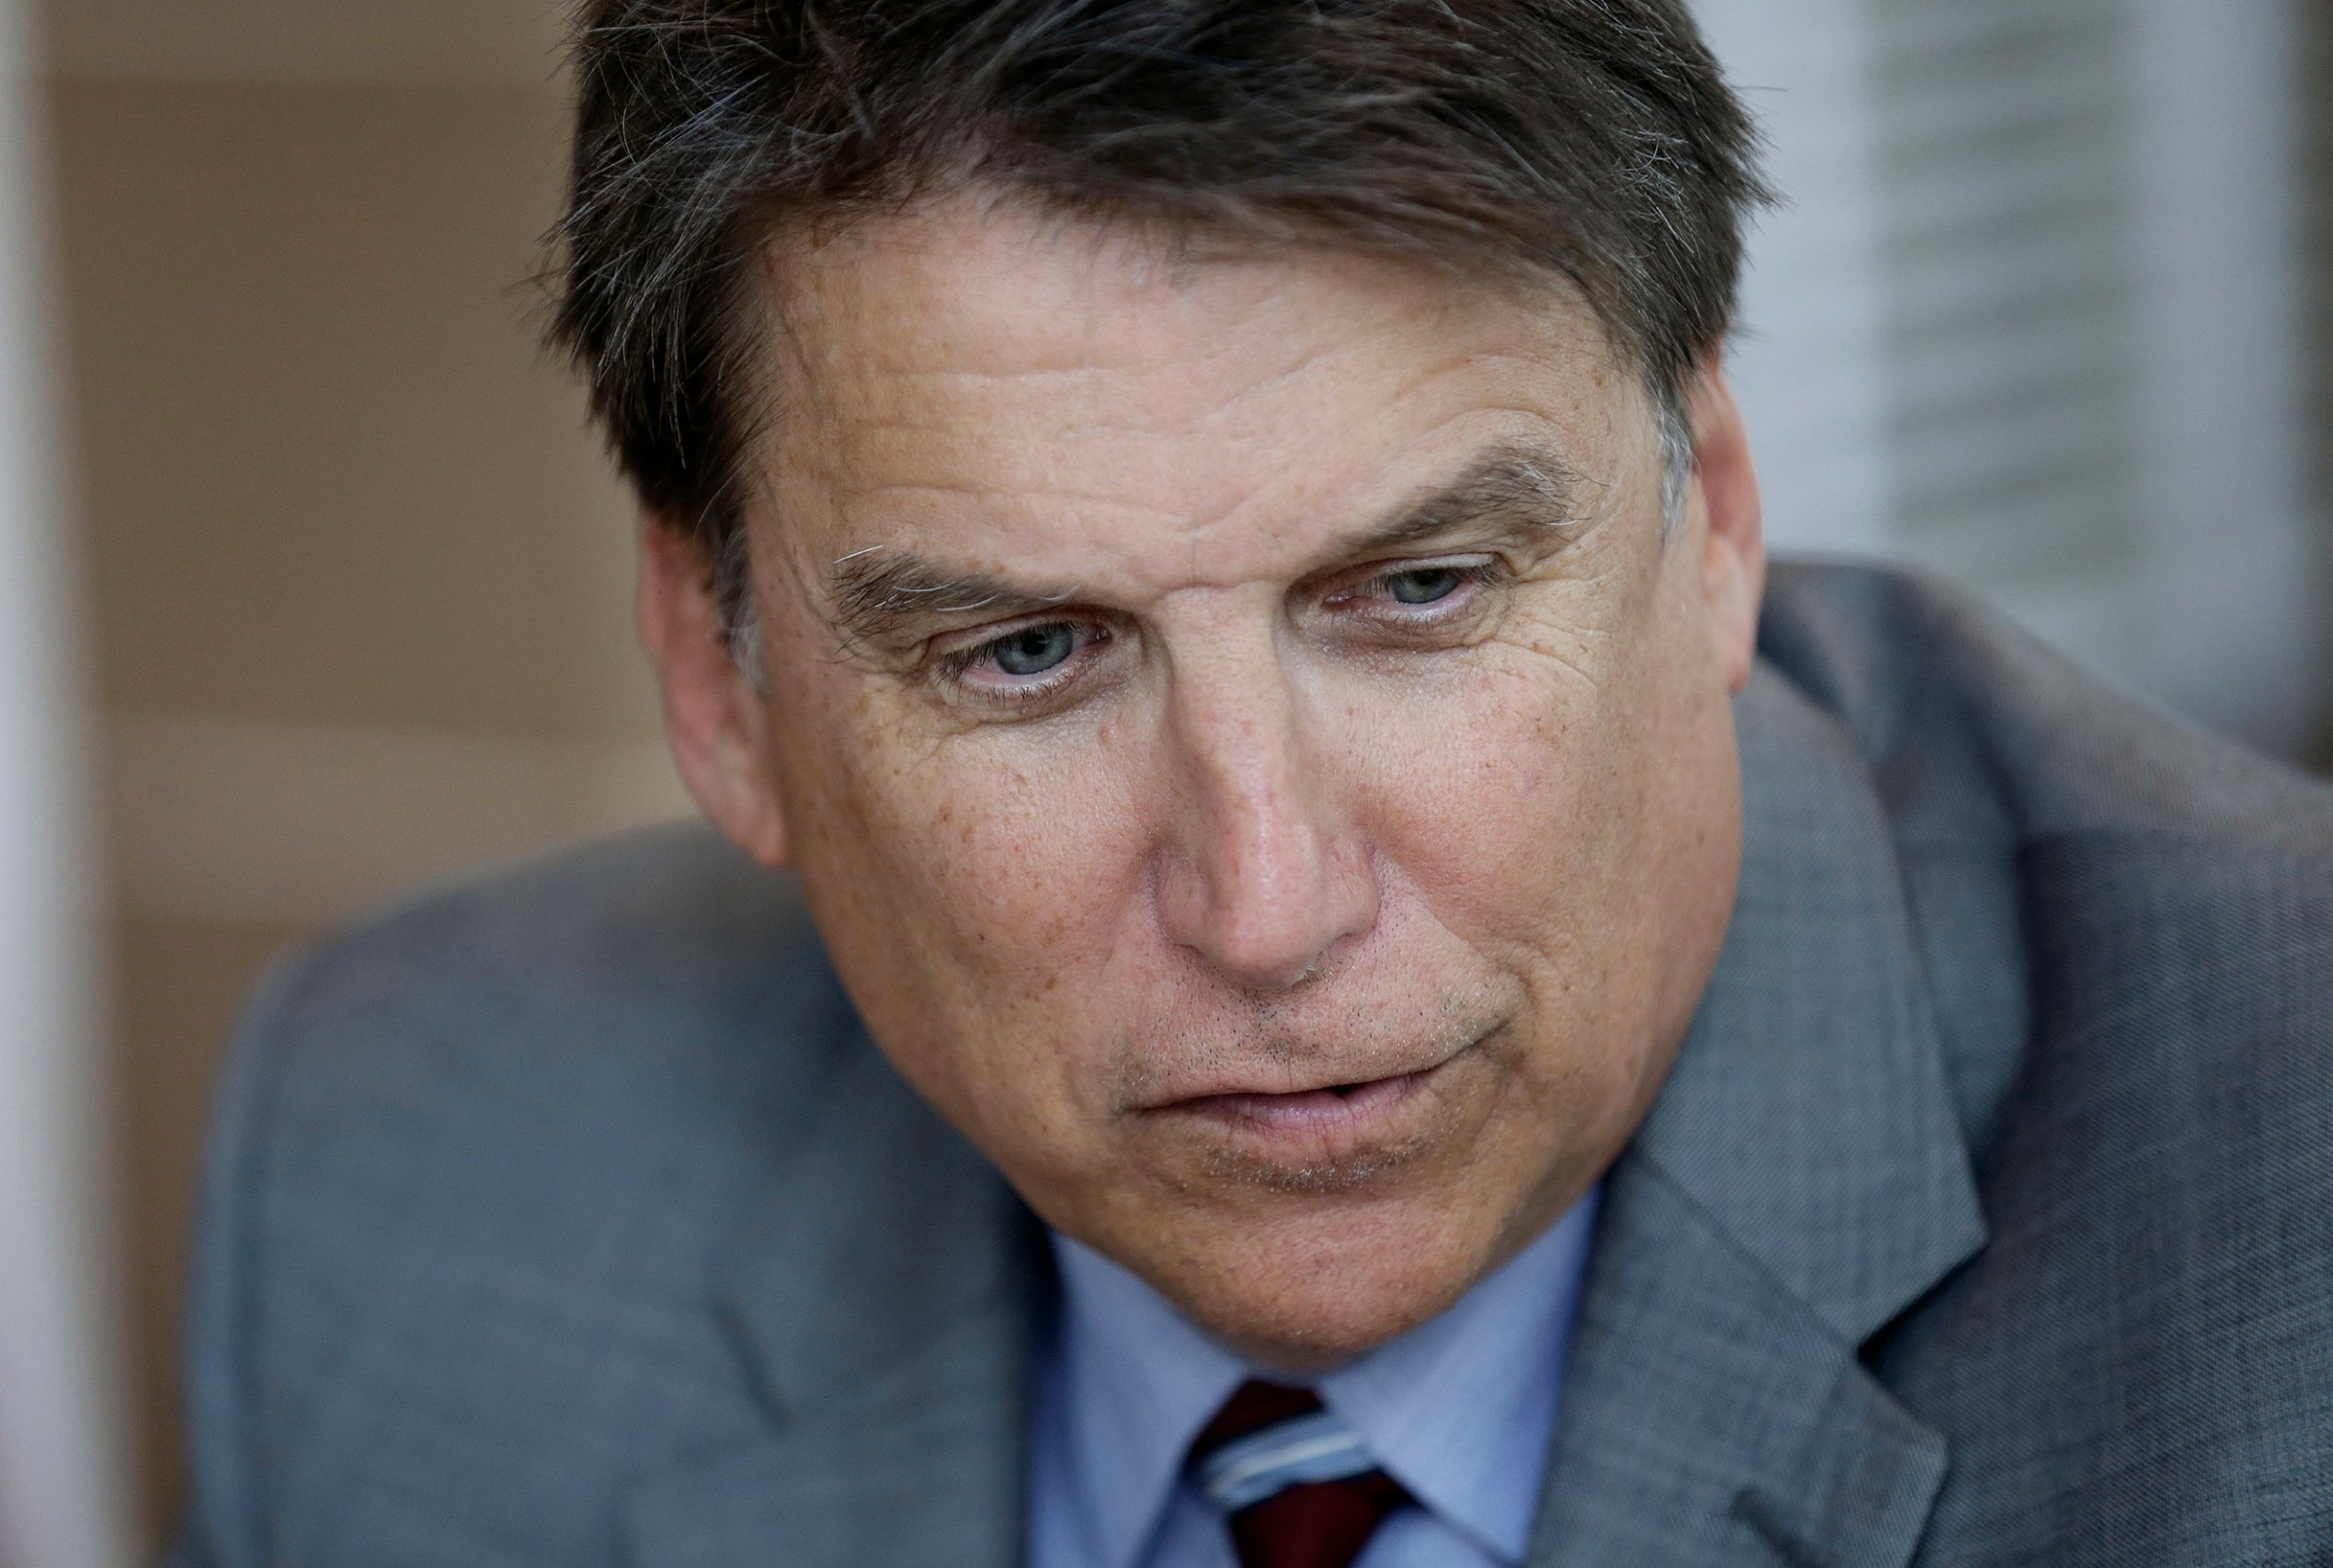 North Carolina Gov. Pat McCrory makes remarks during an interview at the Governor's mansion in Raleigh, N.C., on April 12, 2016.